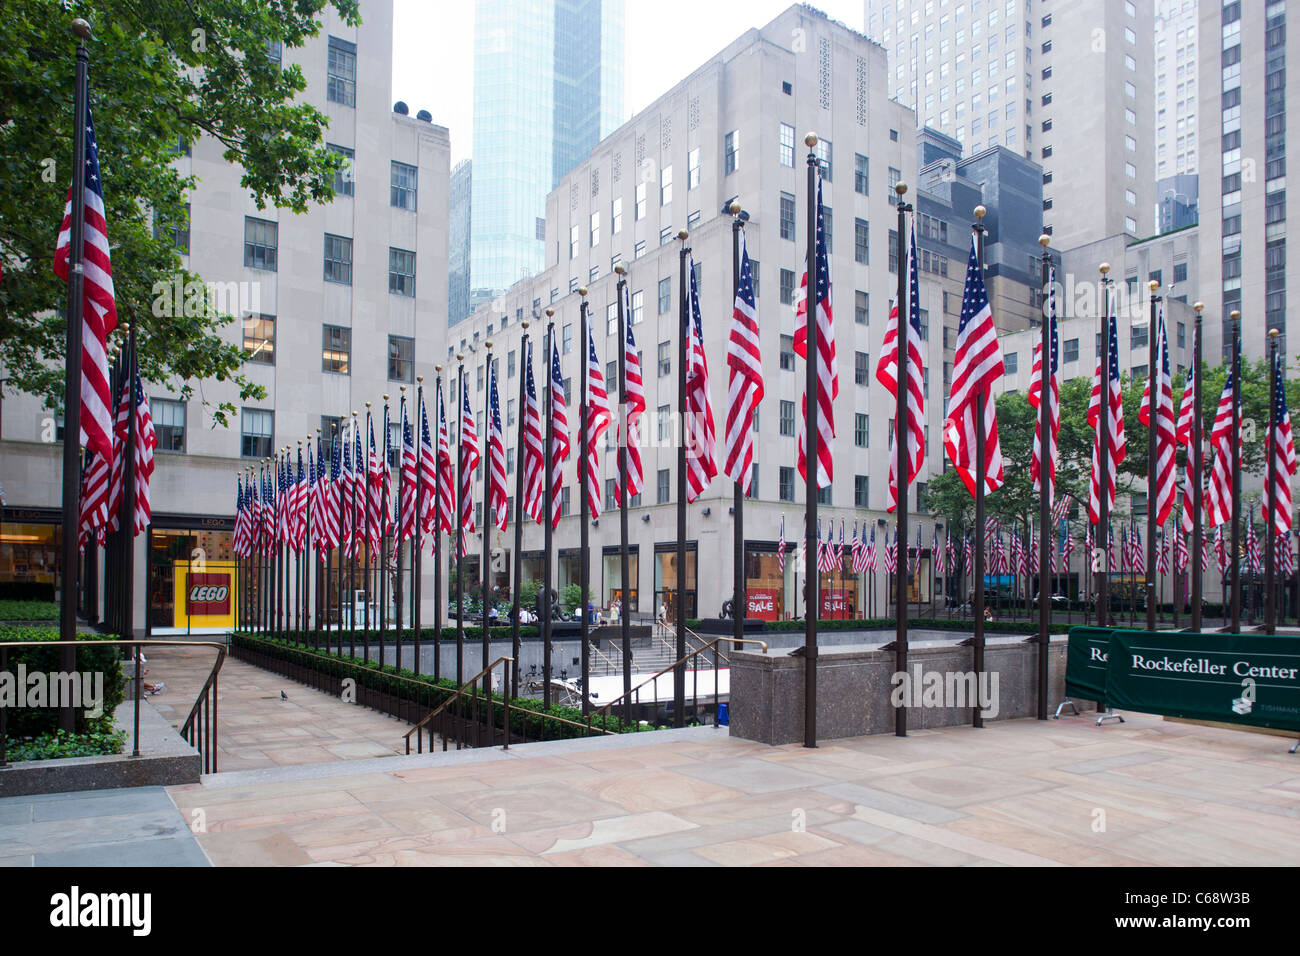 American flags at Rockefeller Center in New York Stock Photo